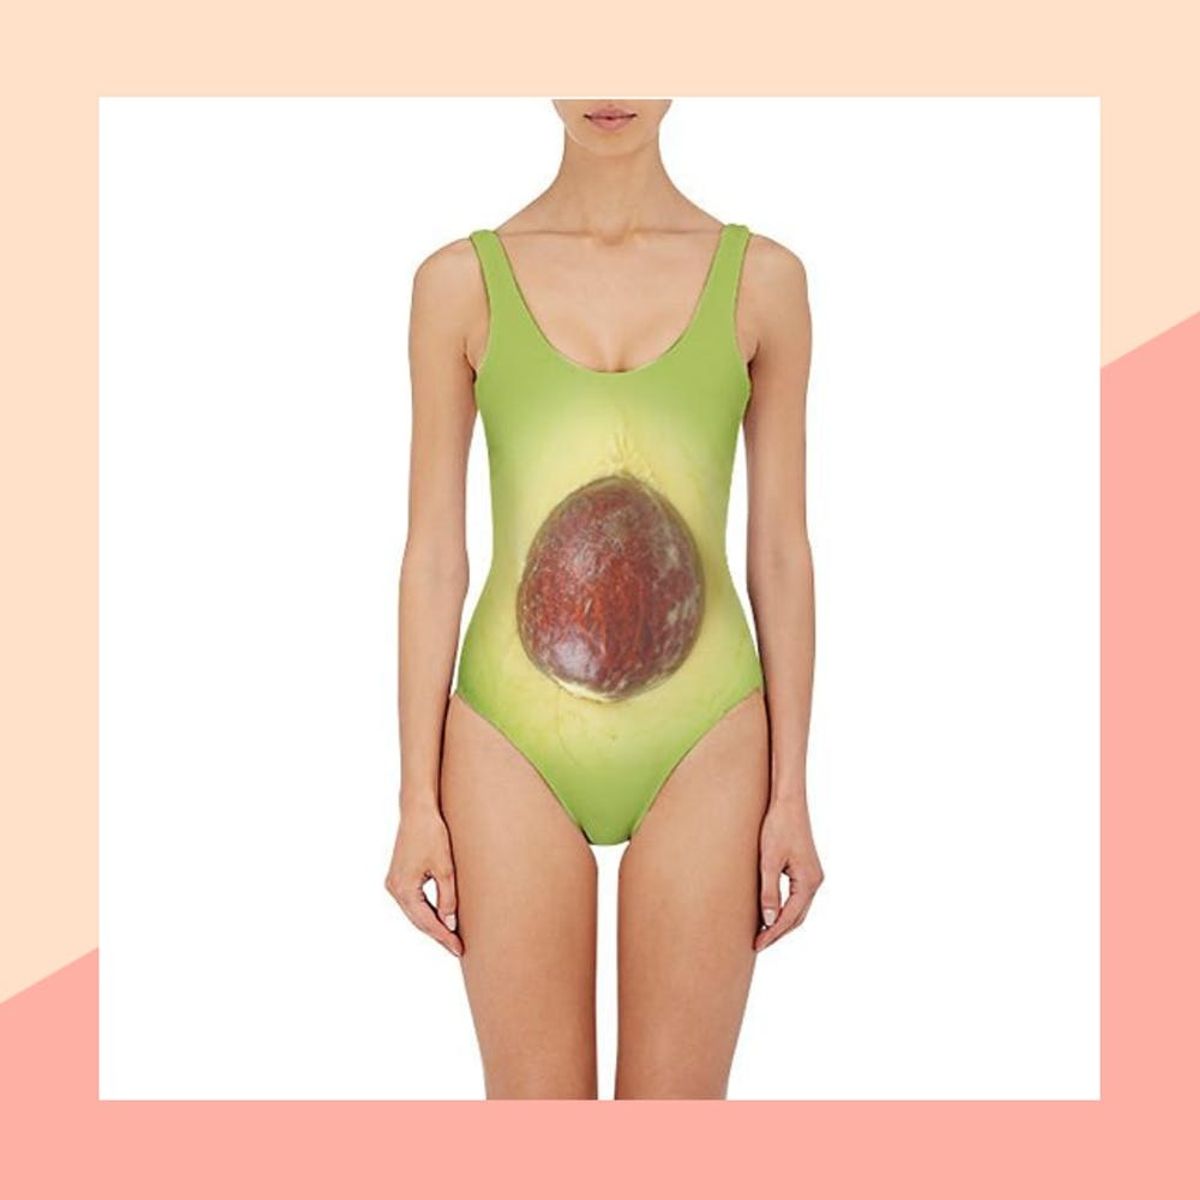 There’s an Avocado Bathing Suit, and It’s Surprisingly… Adorable?